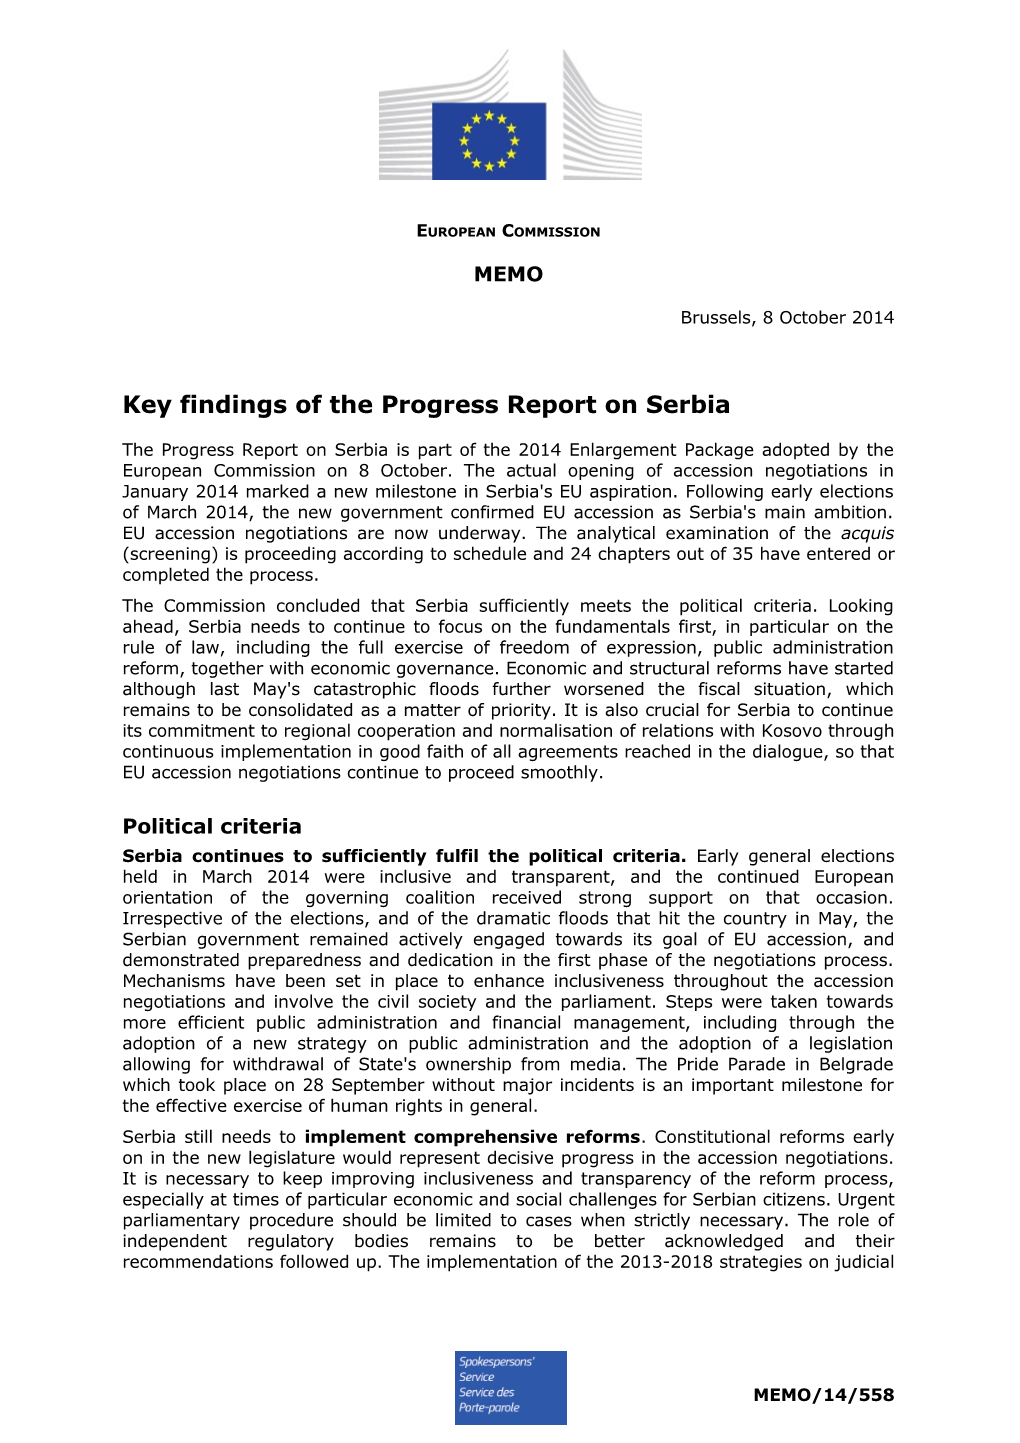 Key Findings of the Progress Report on Serbia